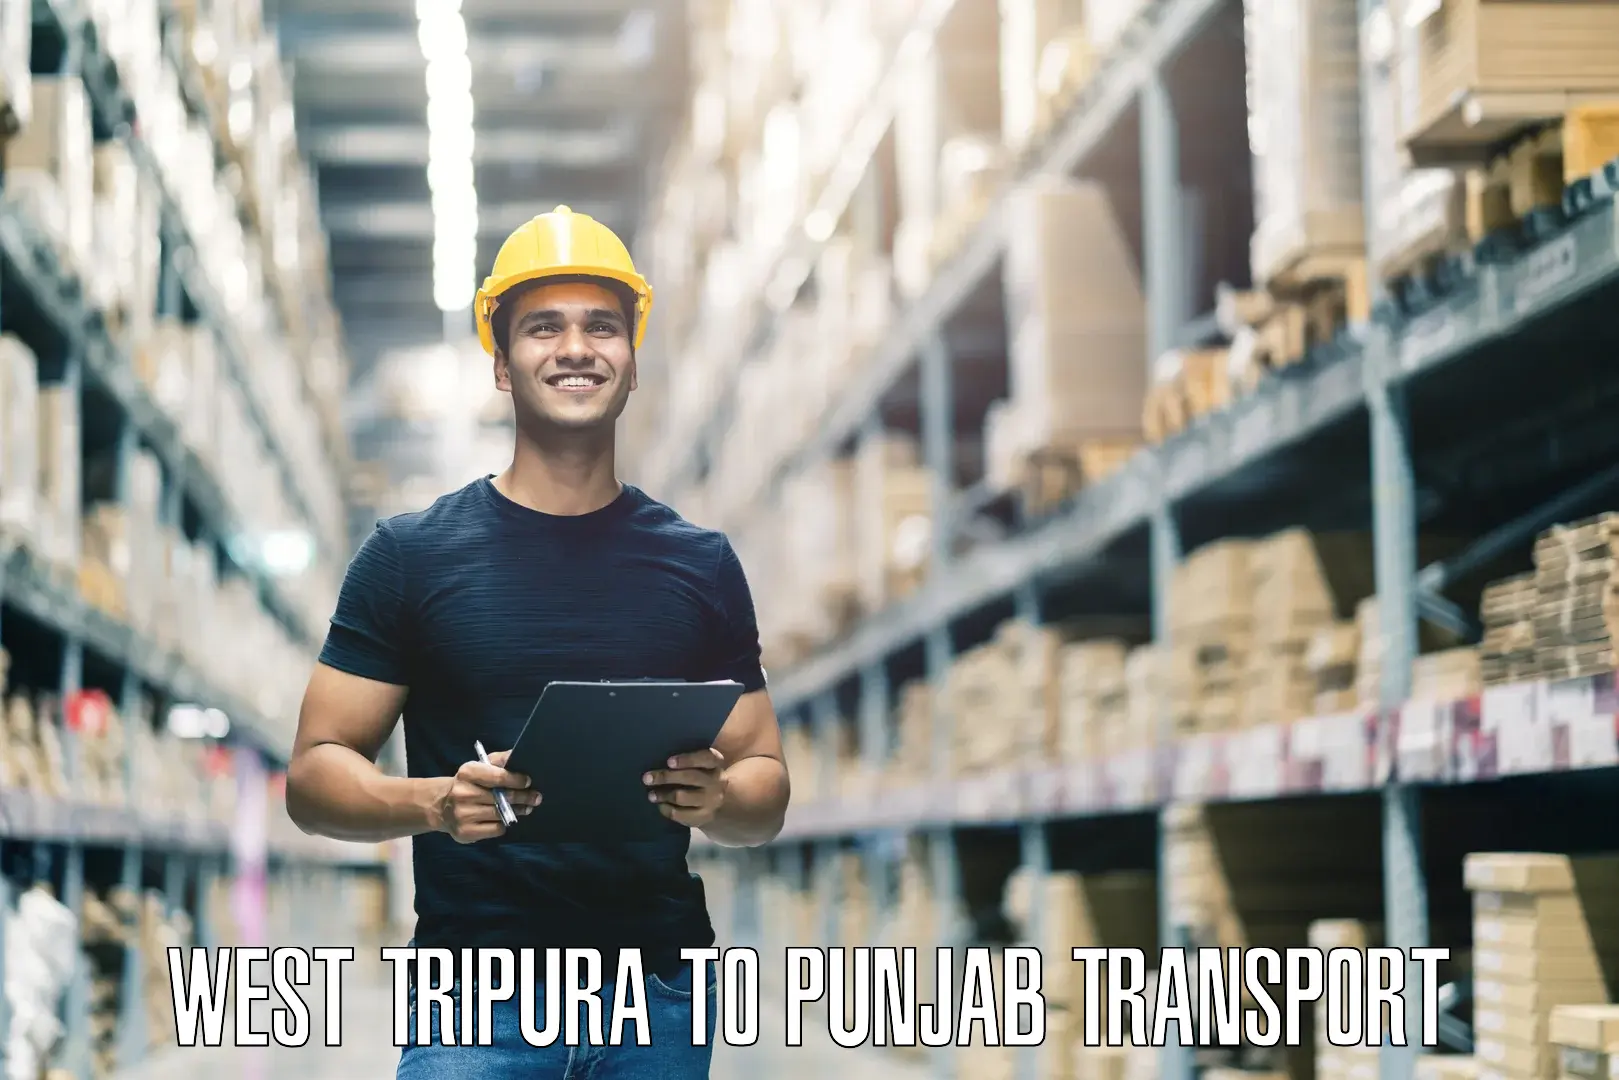 Road transport services West Tripura to Dhilwan